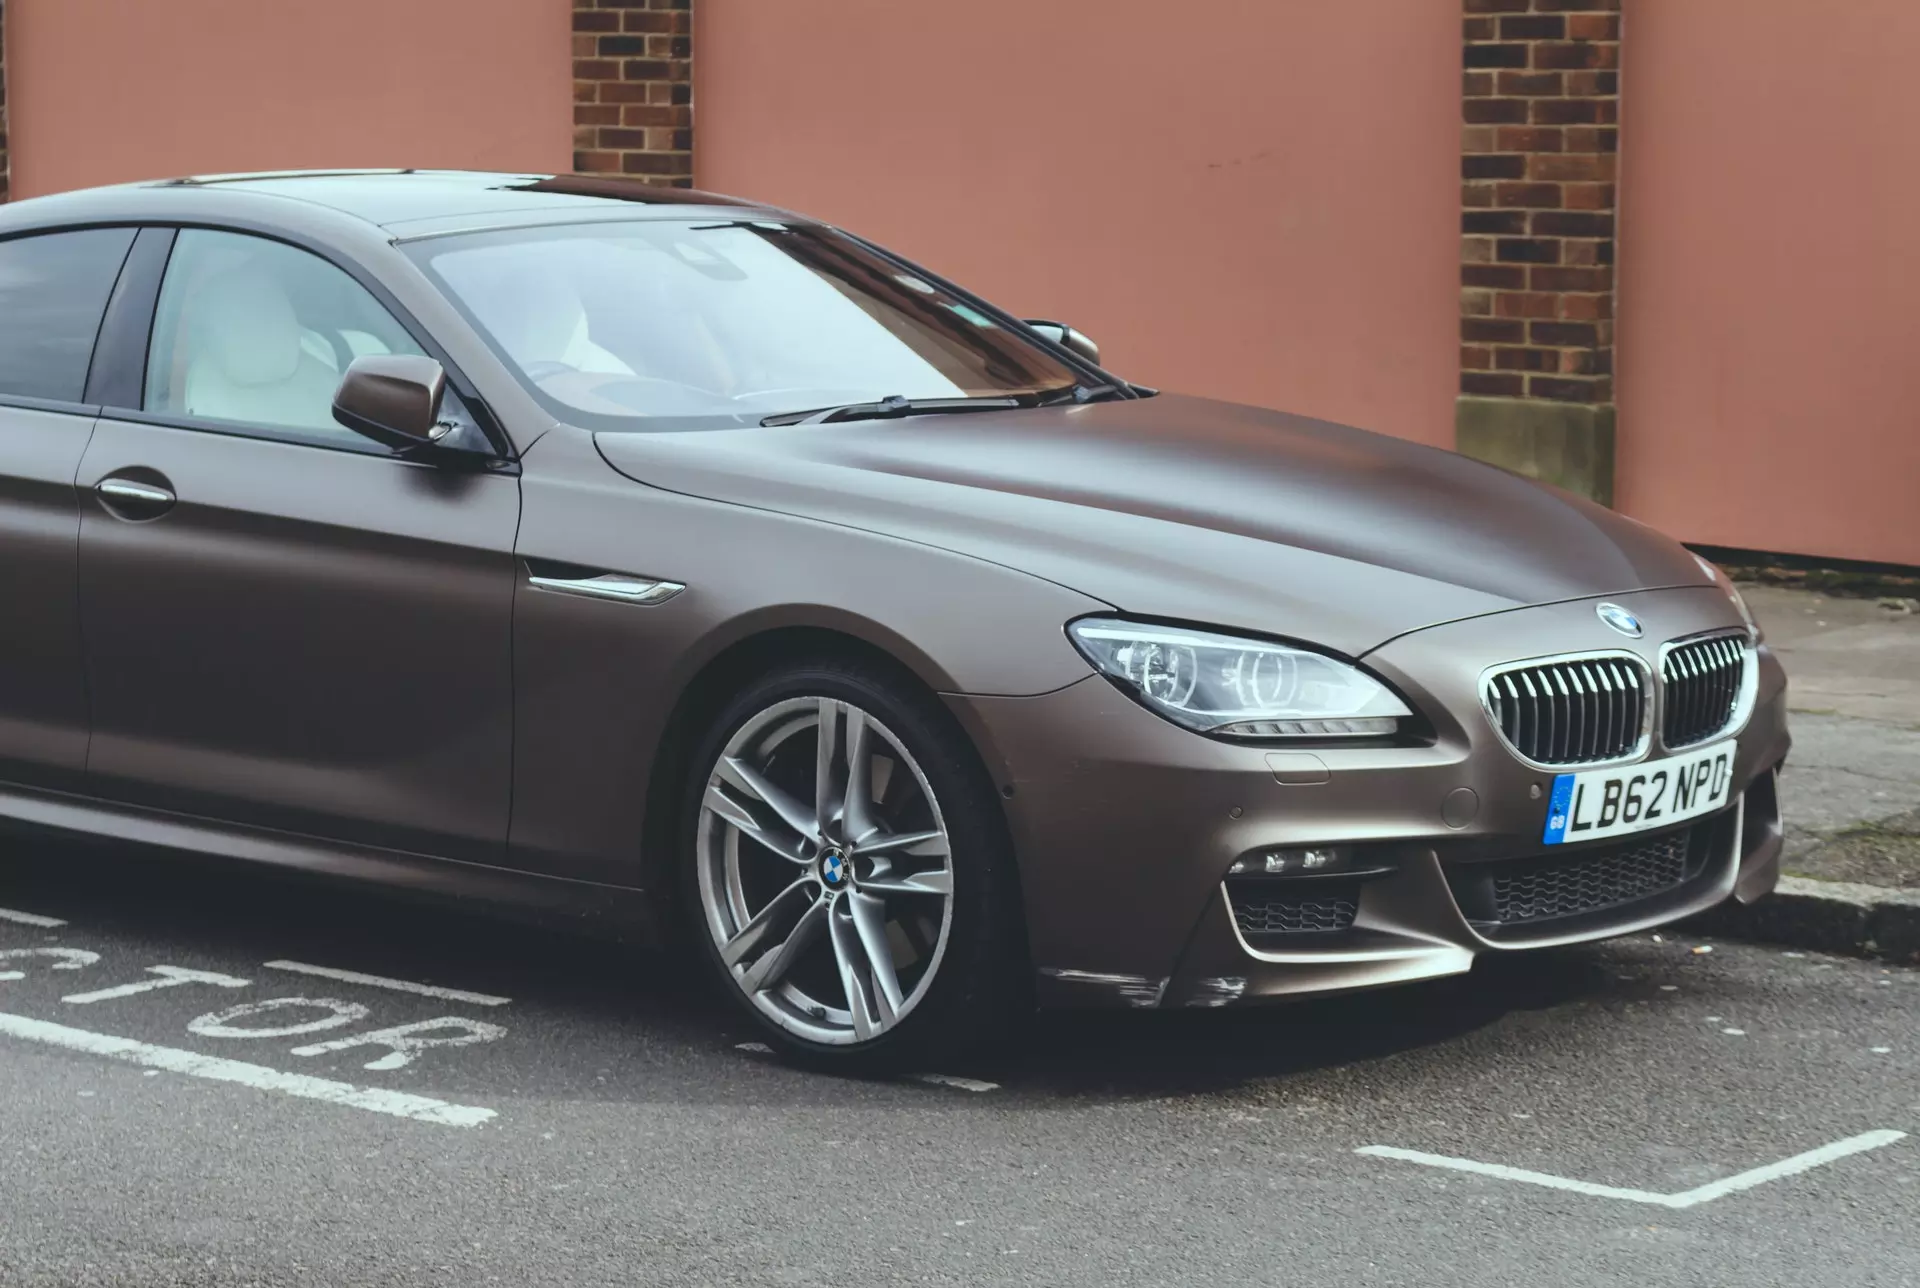 BMW 7 Series: What are the best-used luxury cars to buy? Hampshire